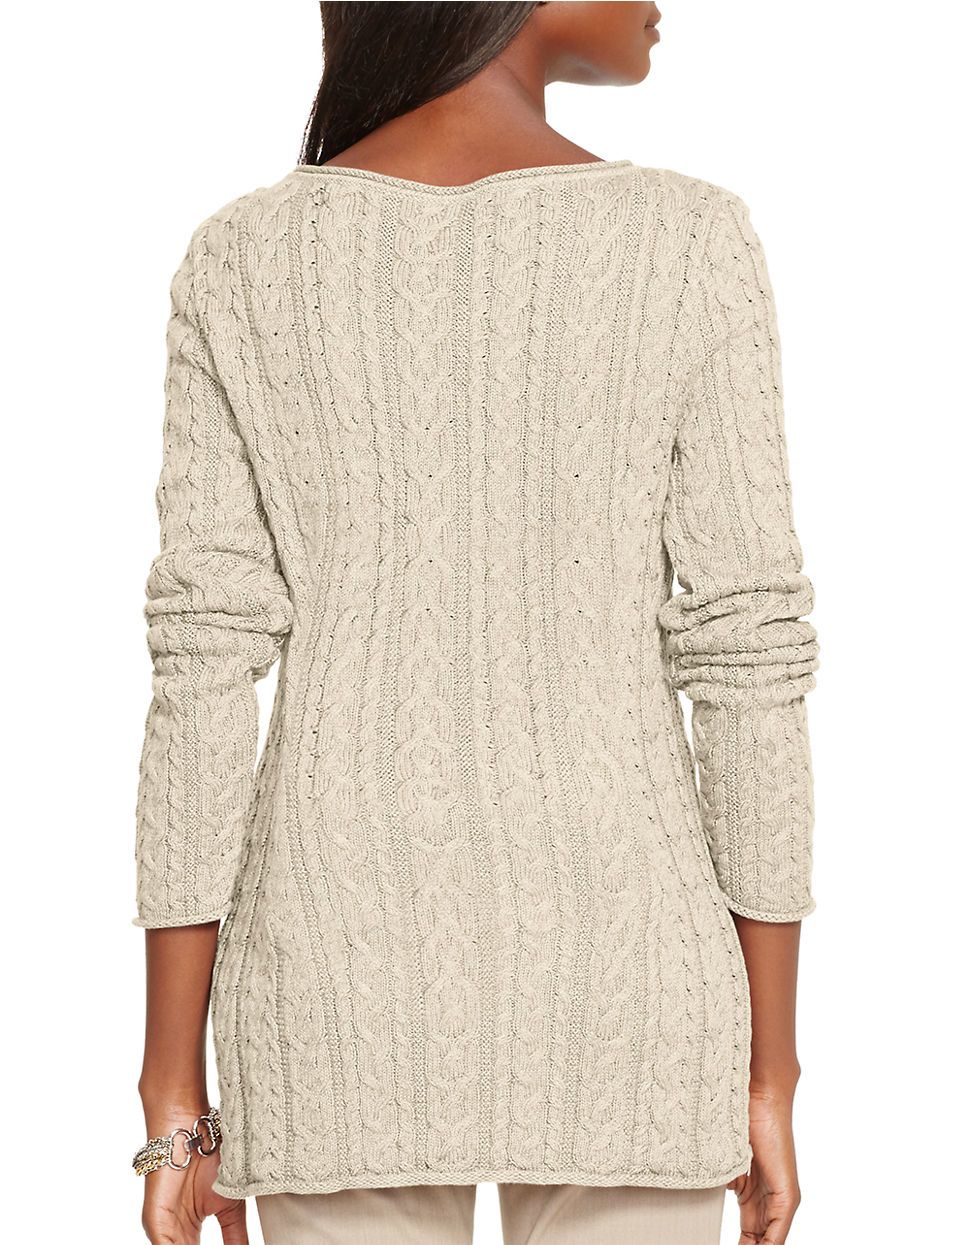 Lyst - Lauren By Ralph Lauren Petite Cable-knit Cotton Sweater in Natural